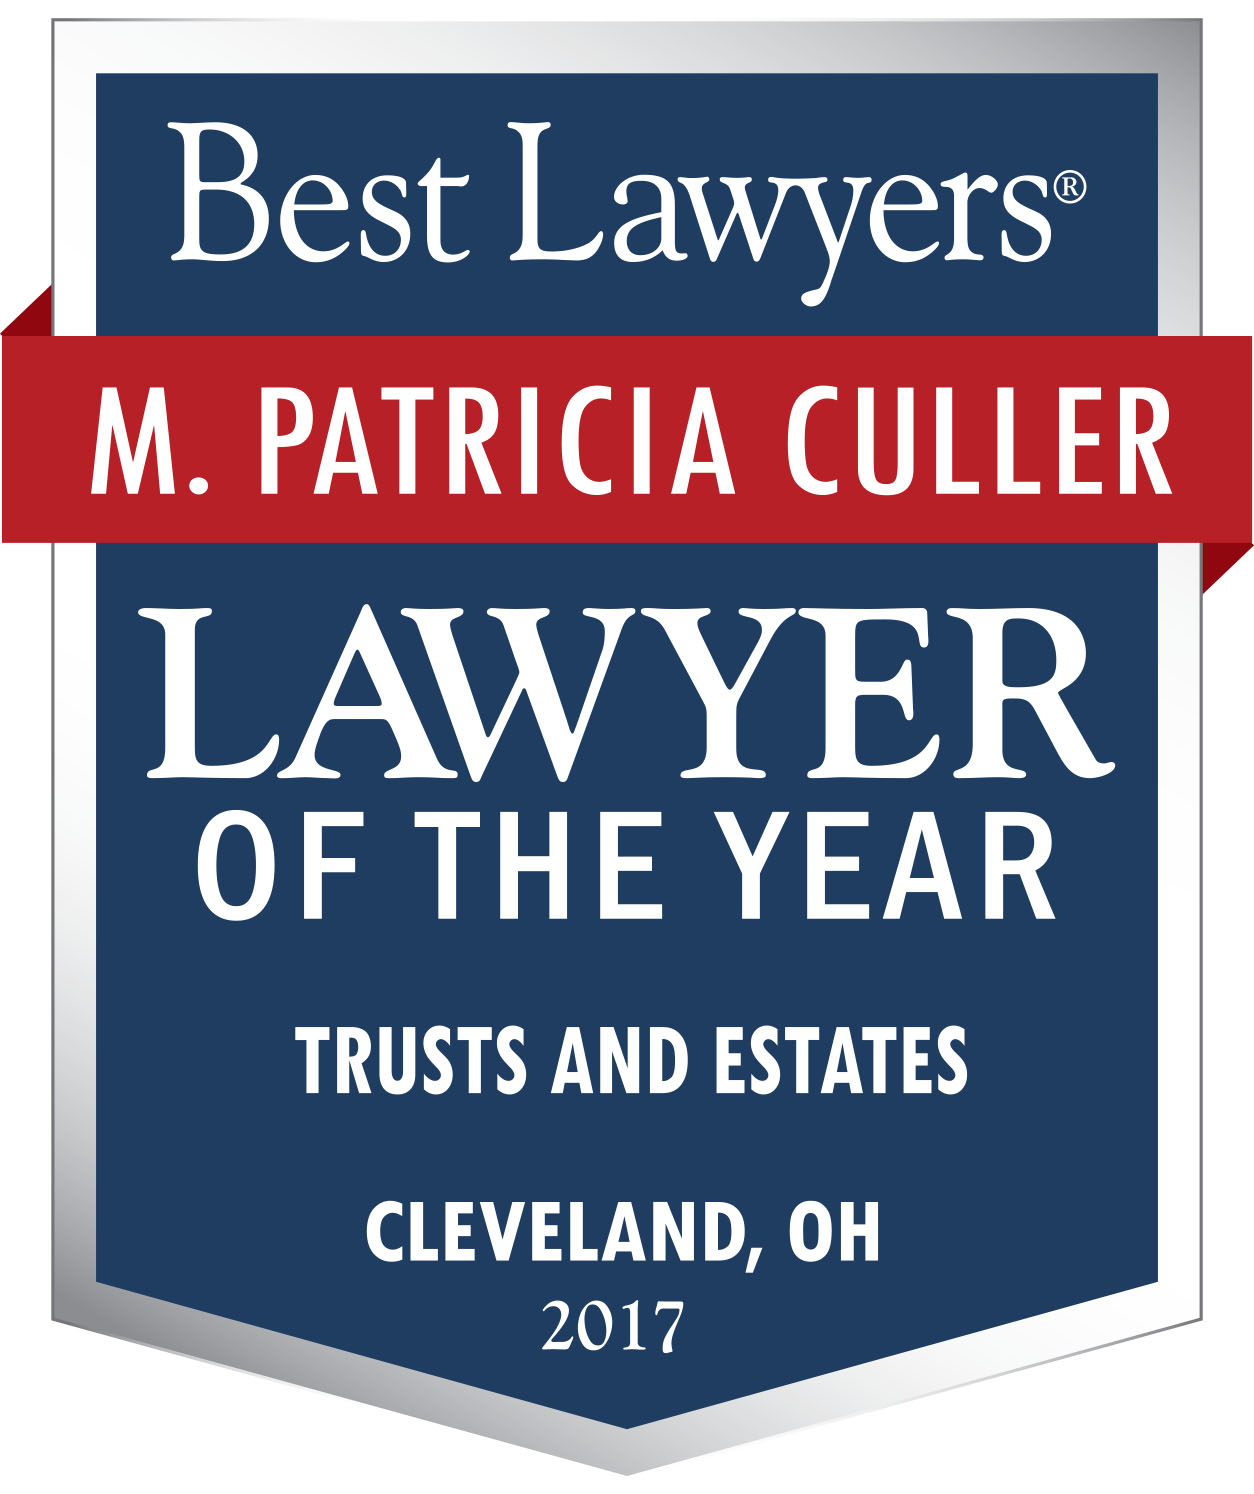 Best Lawyers M. Patricia Culler- Lawyer of the year Trusts and Estates Cleveland Ohio 2017 badge